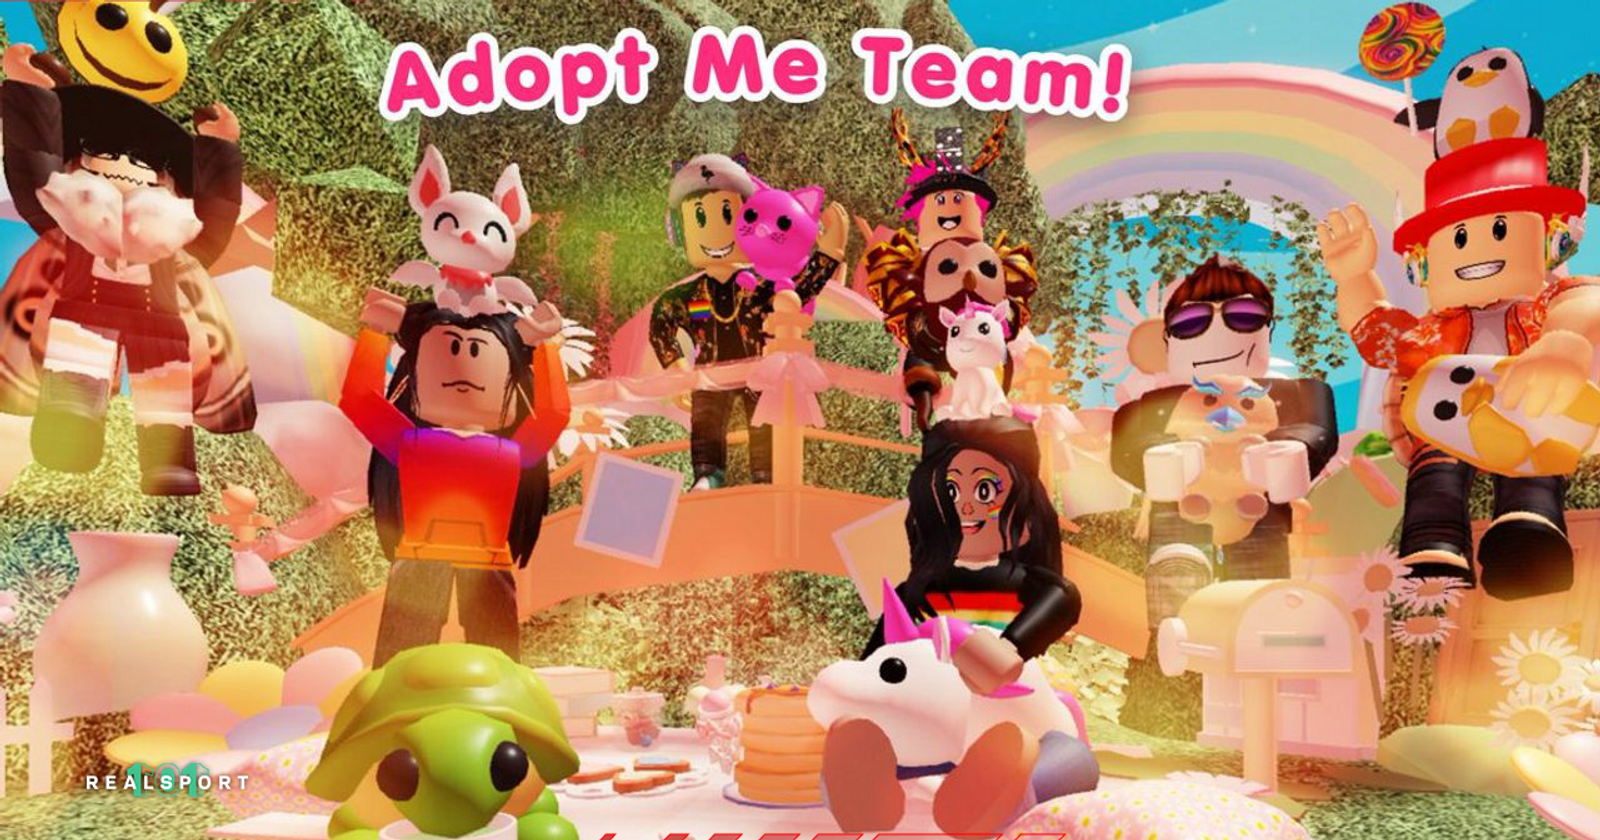 New Client Spotlight: Uplift Games - Adopt Me on Roblox